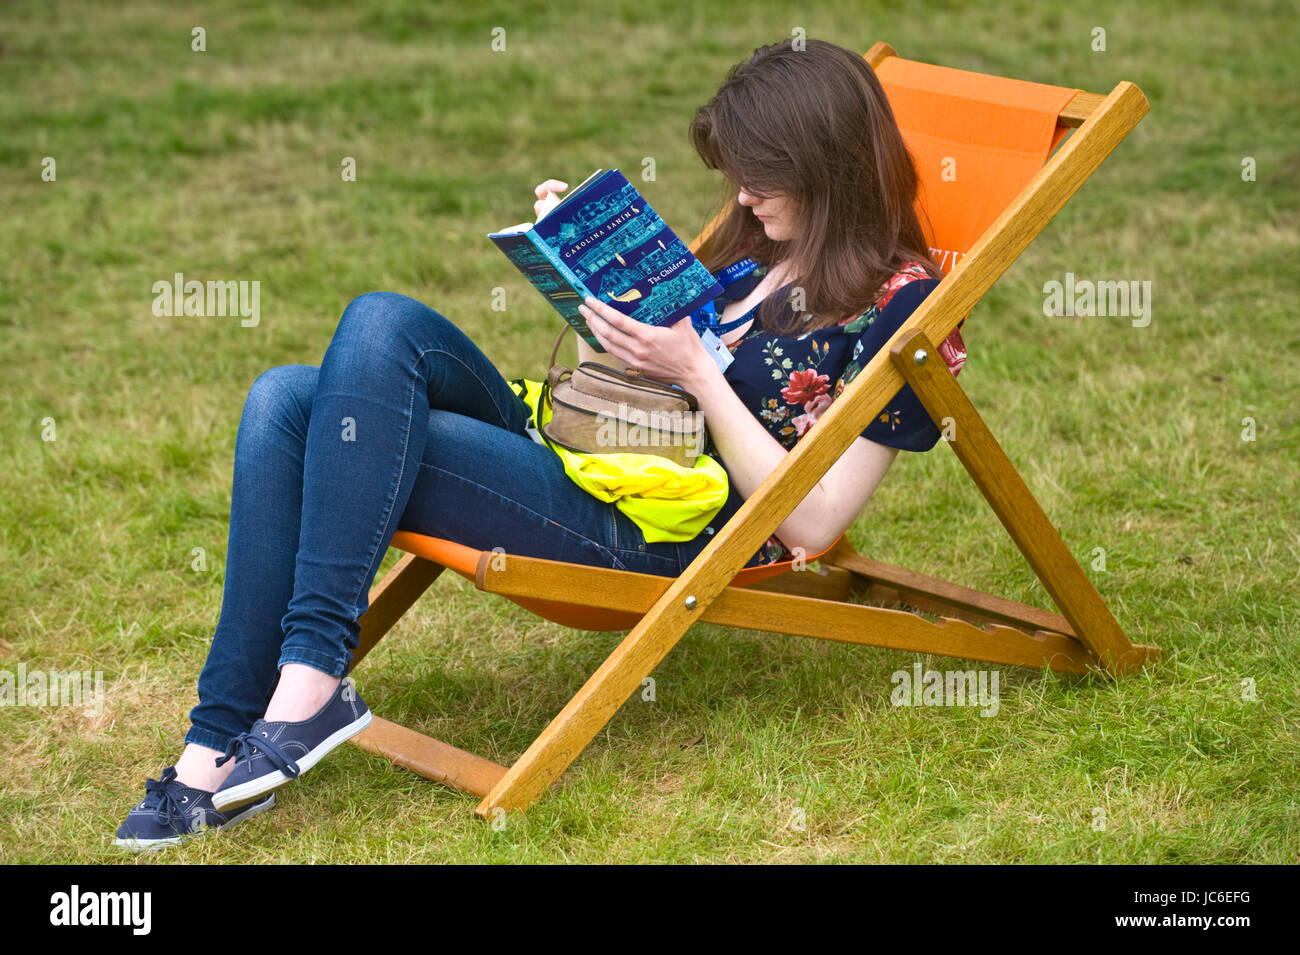 Young woman reading book relaxing in deckchair at Hay Festival of Literature and the Arts 2017 Hay-on-Wye Powys Wales UK Stock Photo